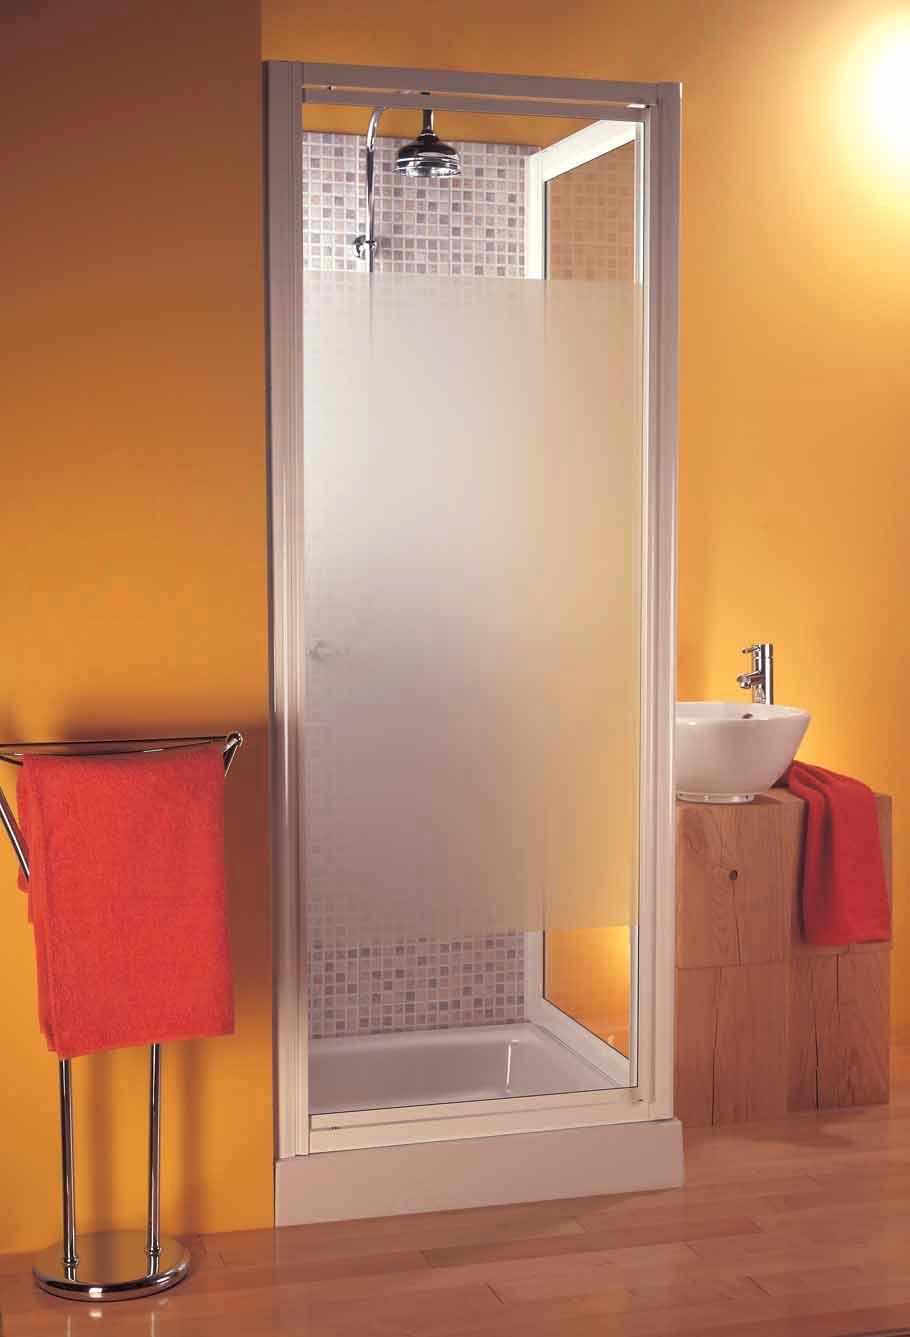 The Supreme Pivot Door with Side Panel. The matching side Panels have been expressly designed for corner installation, space saving, neat and compact.